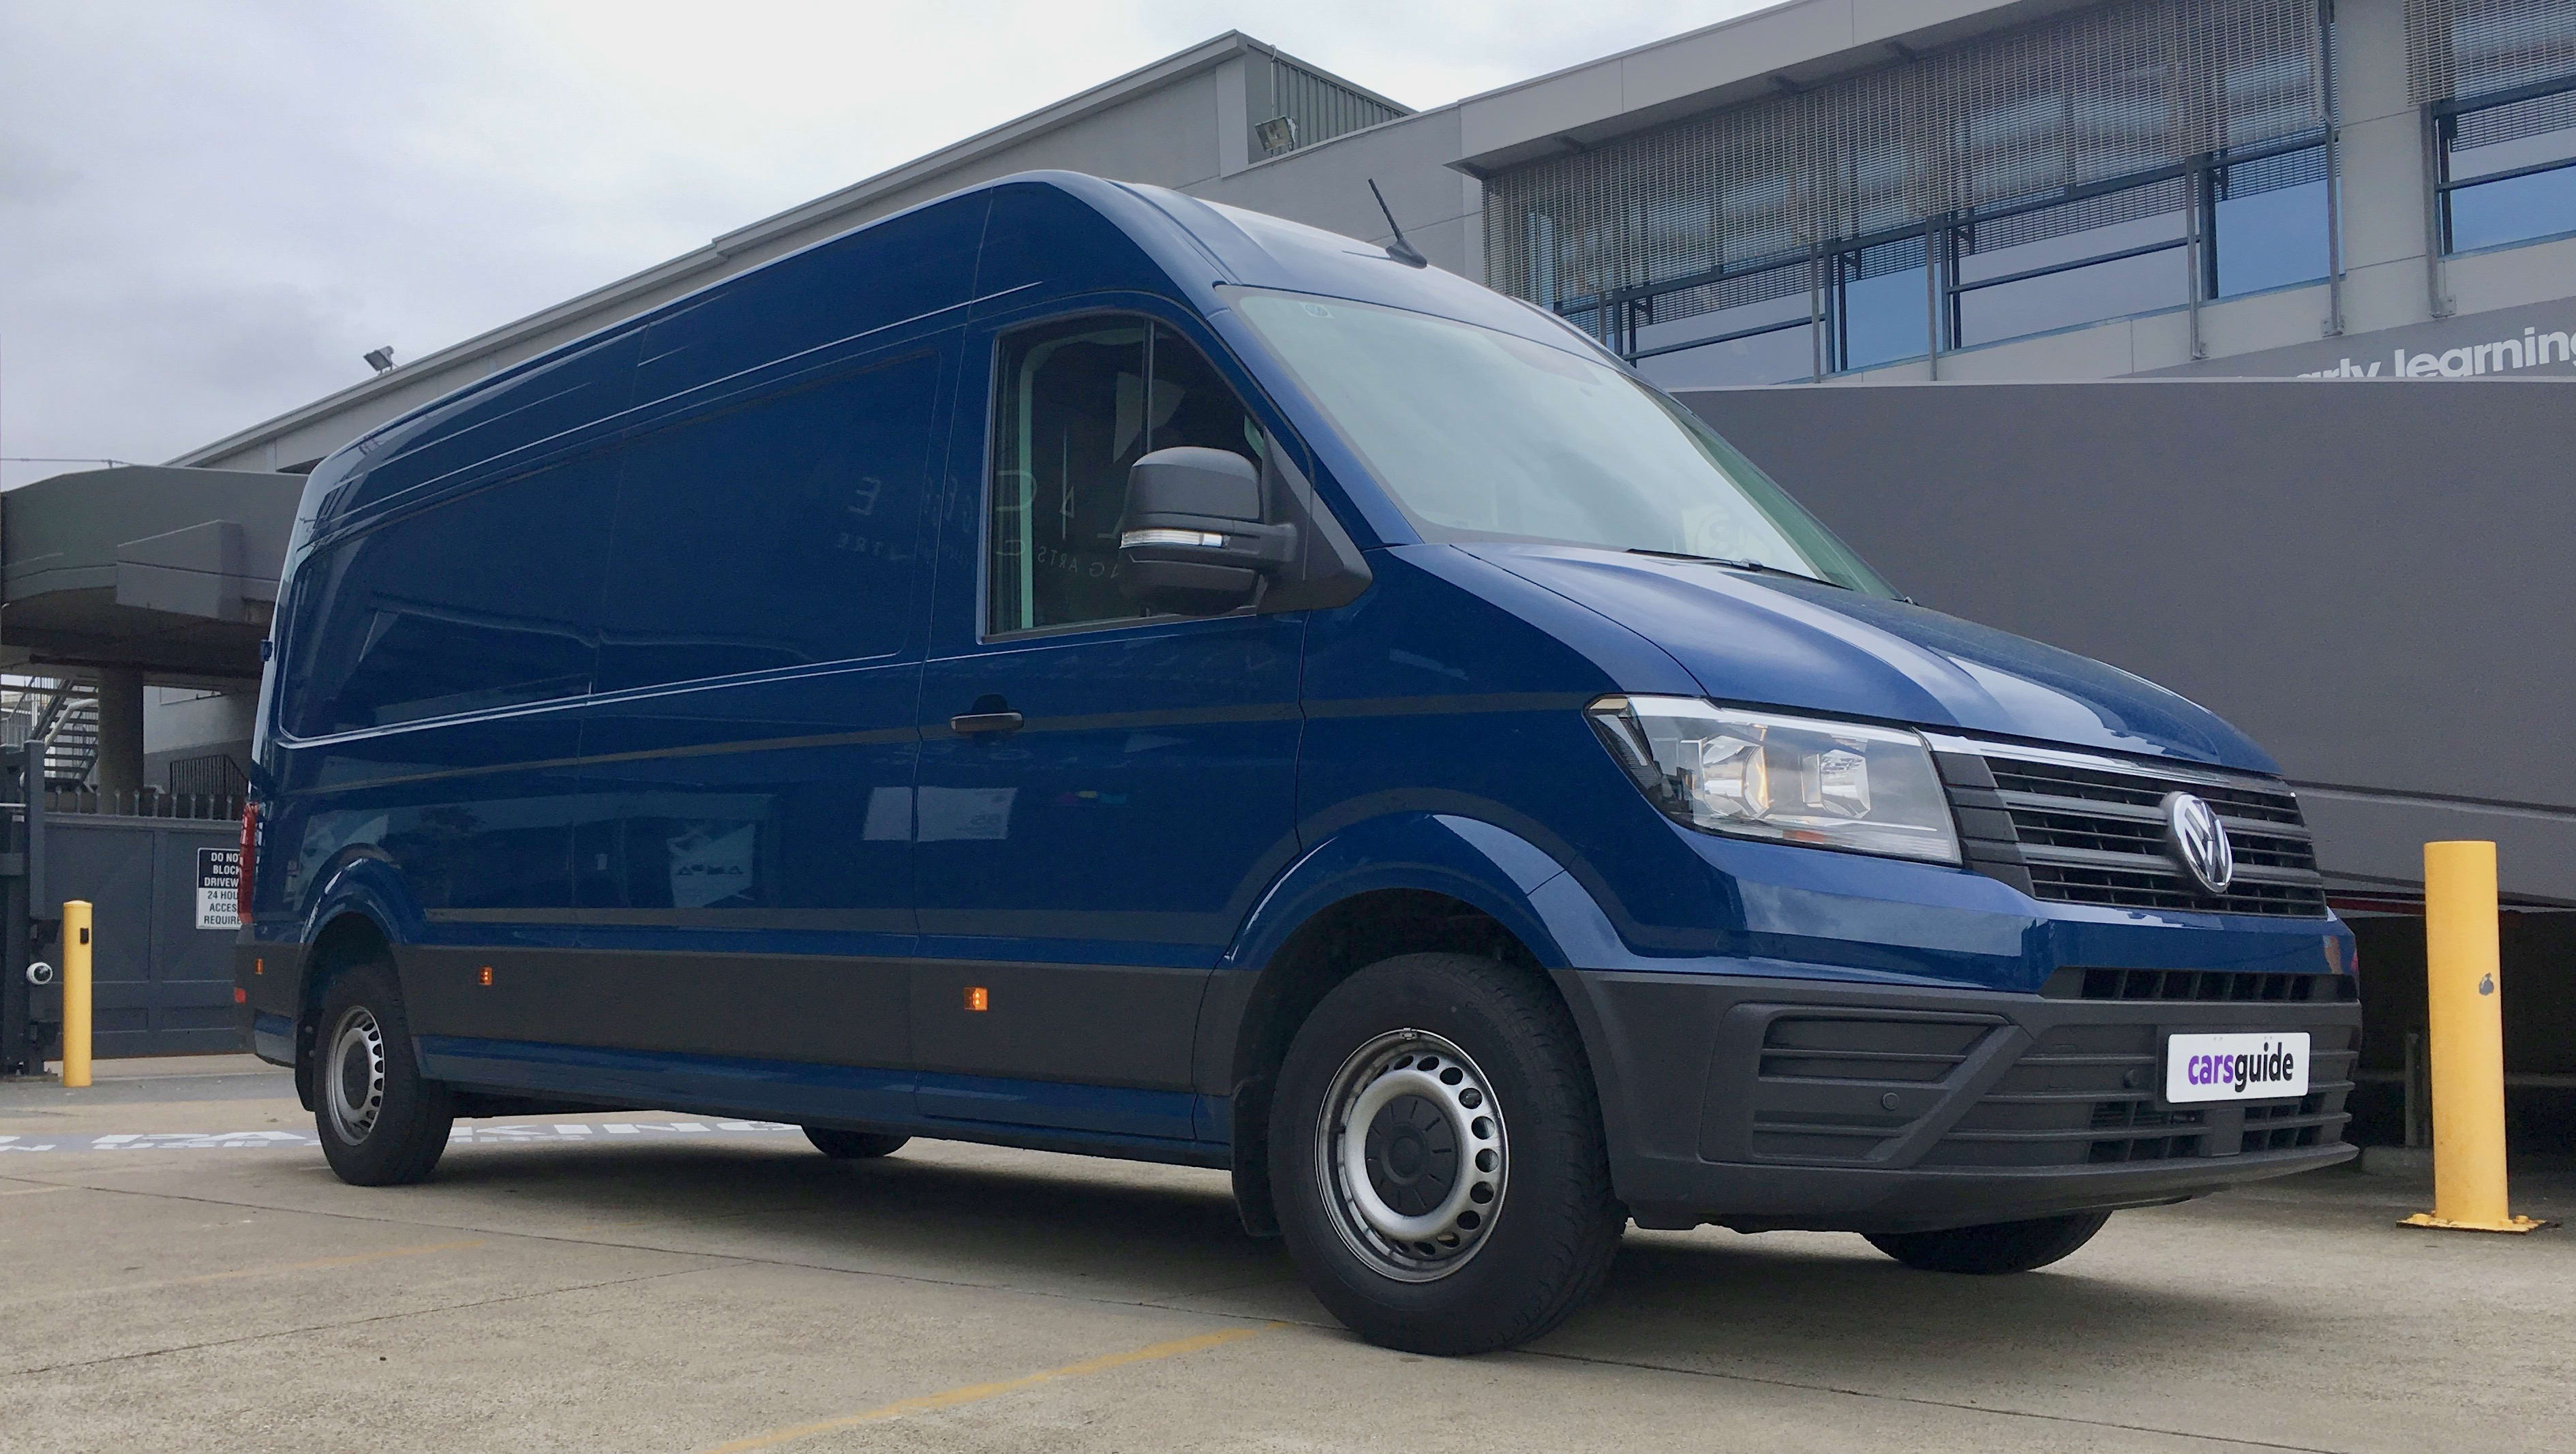 VW Crafter 2019 review TDI410 LWB High Roof CarsGuide